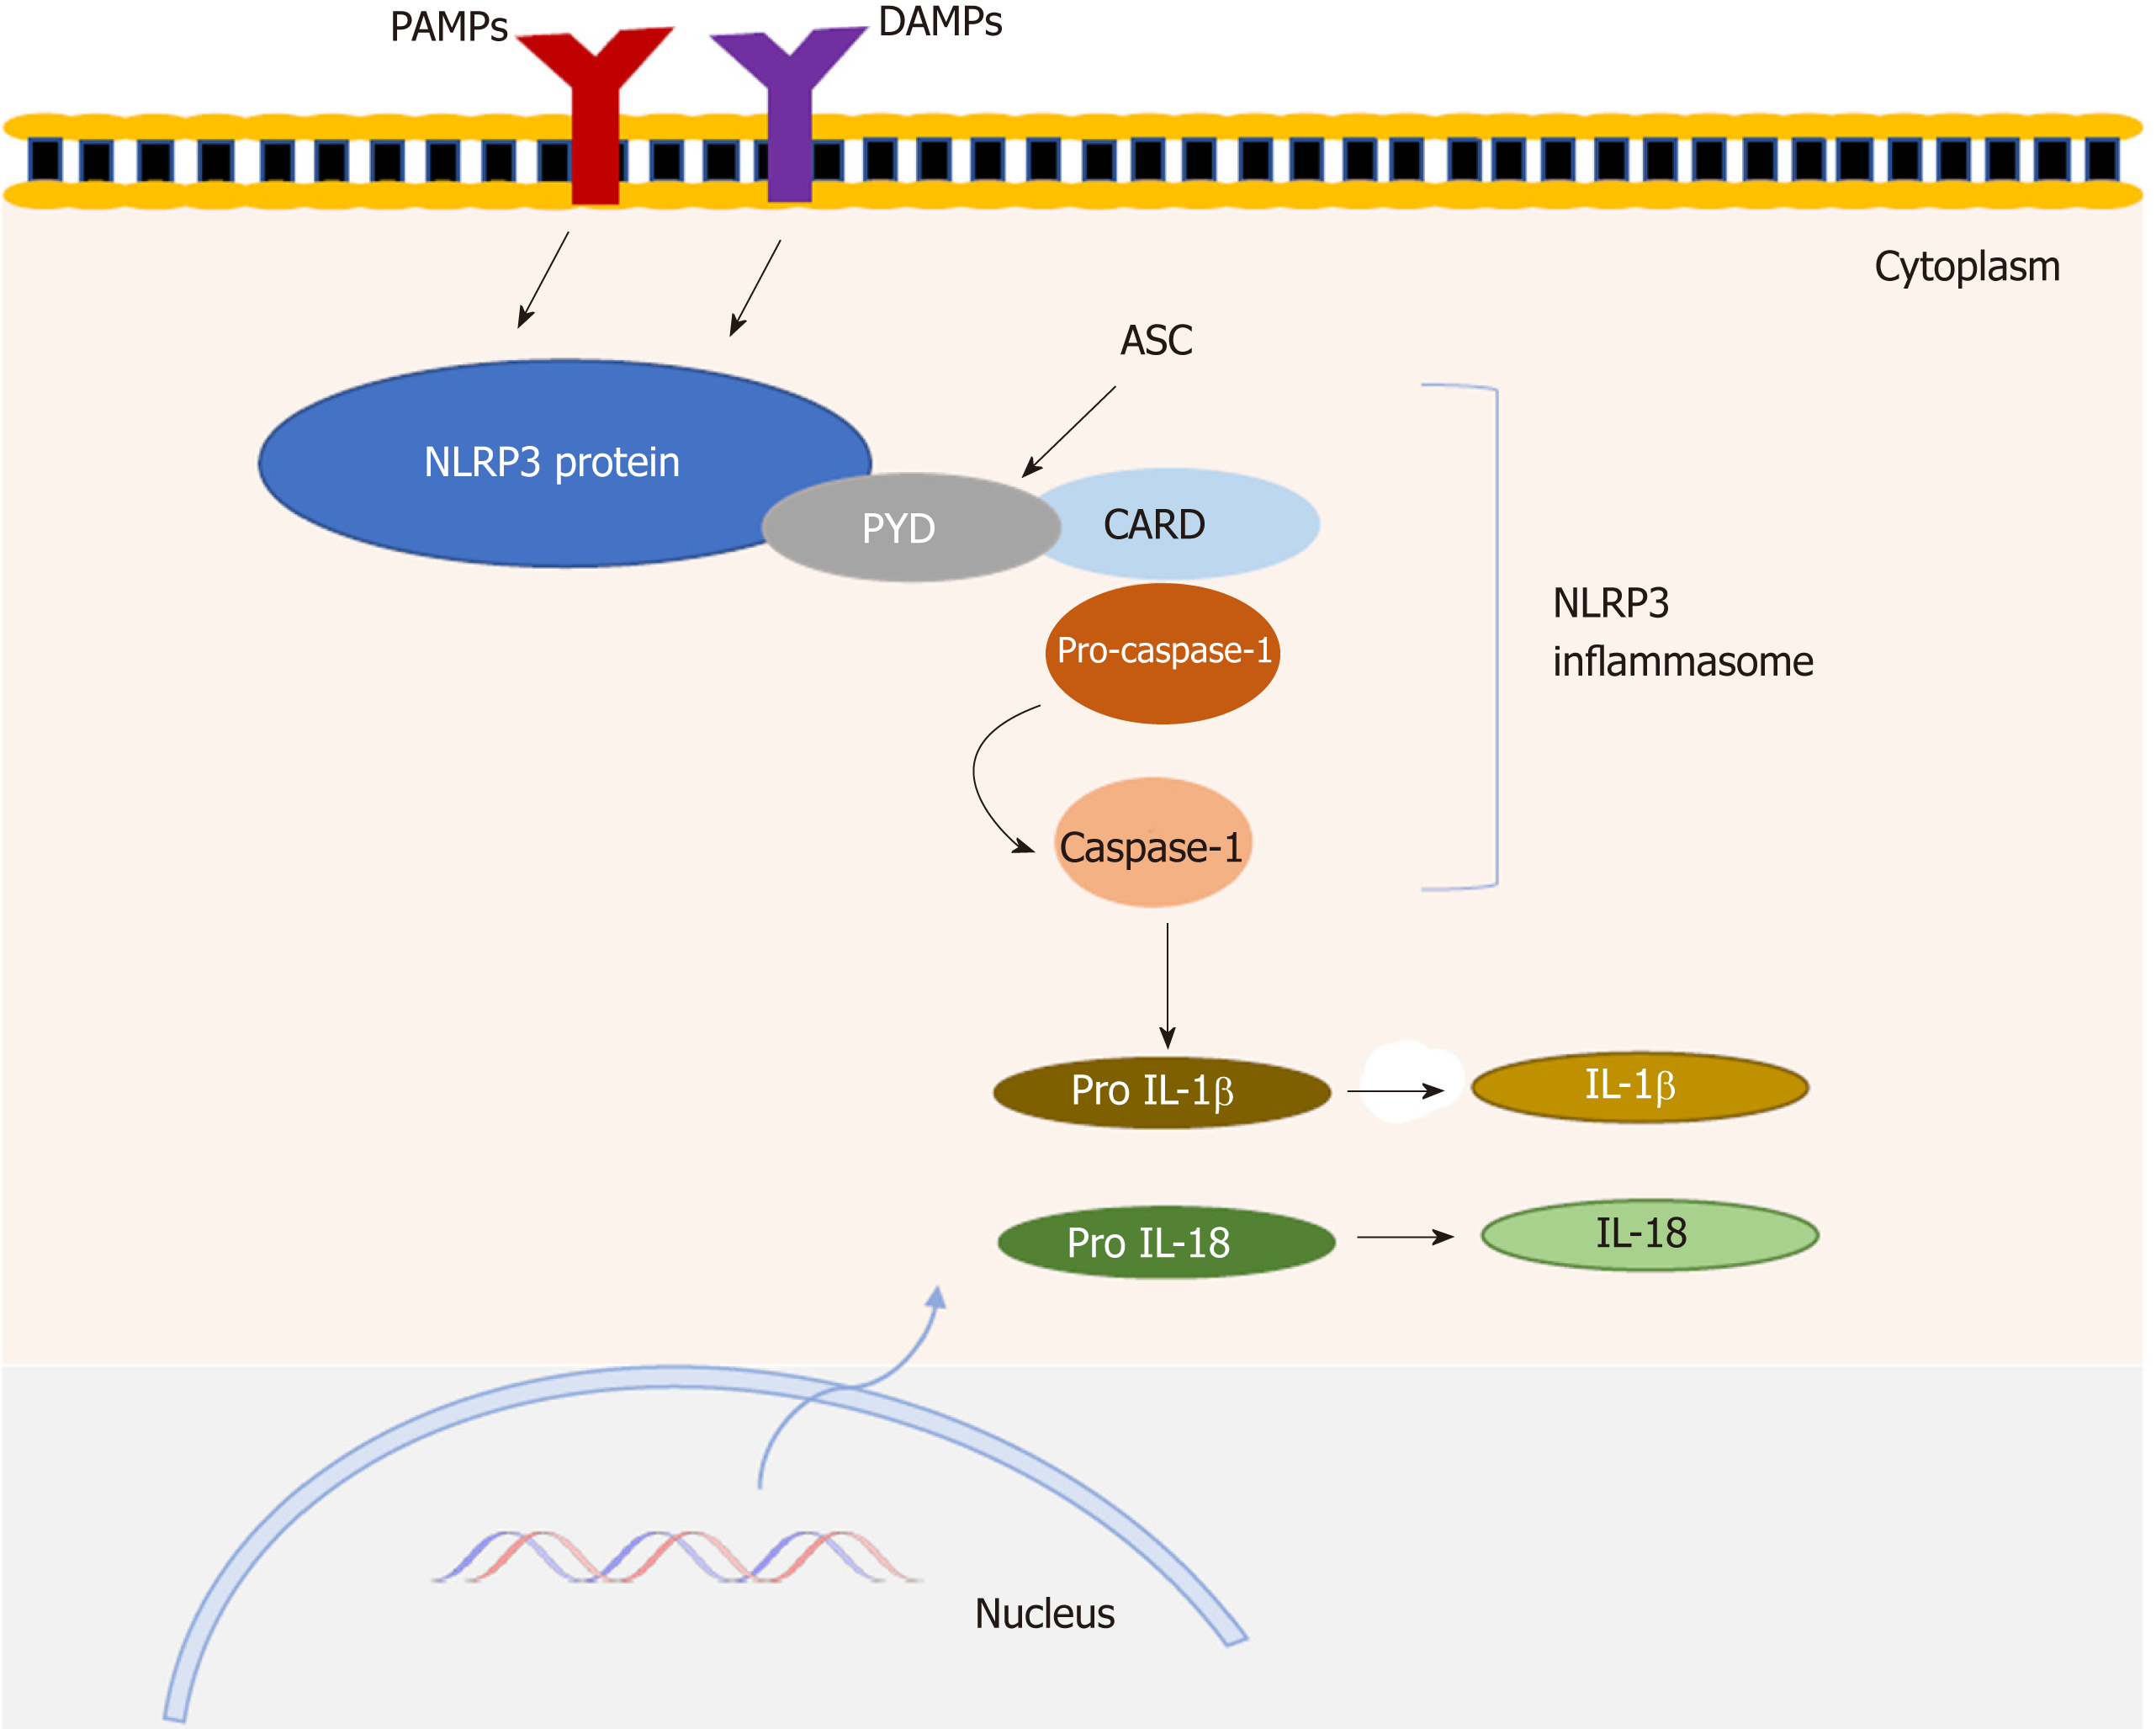 Role of NLRP3 inflammasome in inflammatory bowel diseases